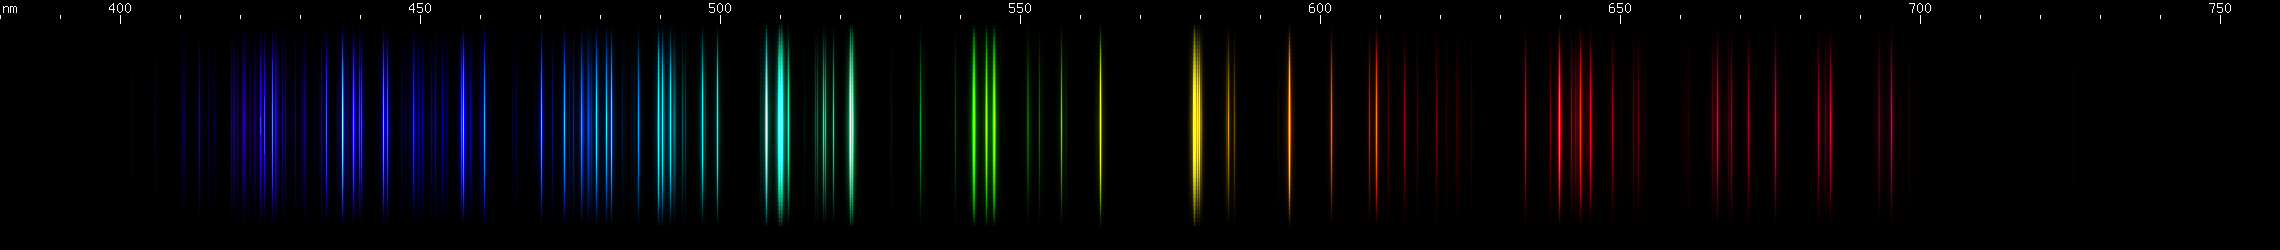 Spectral Lines of Chlorine